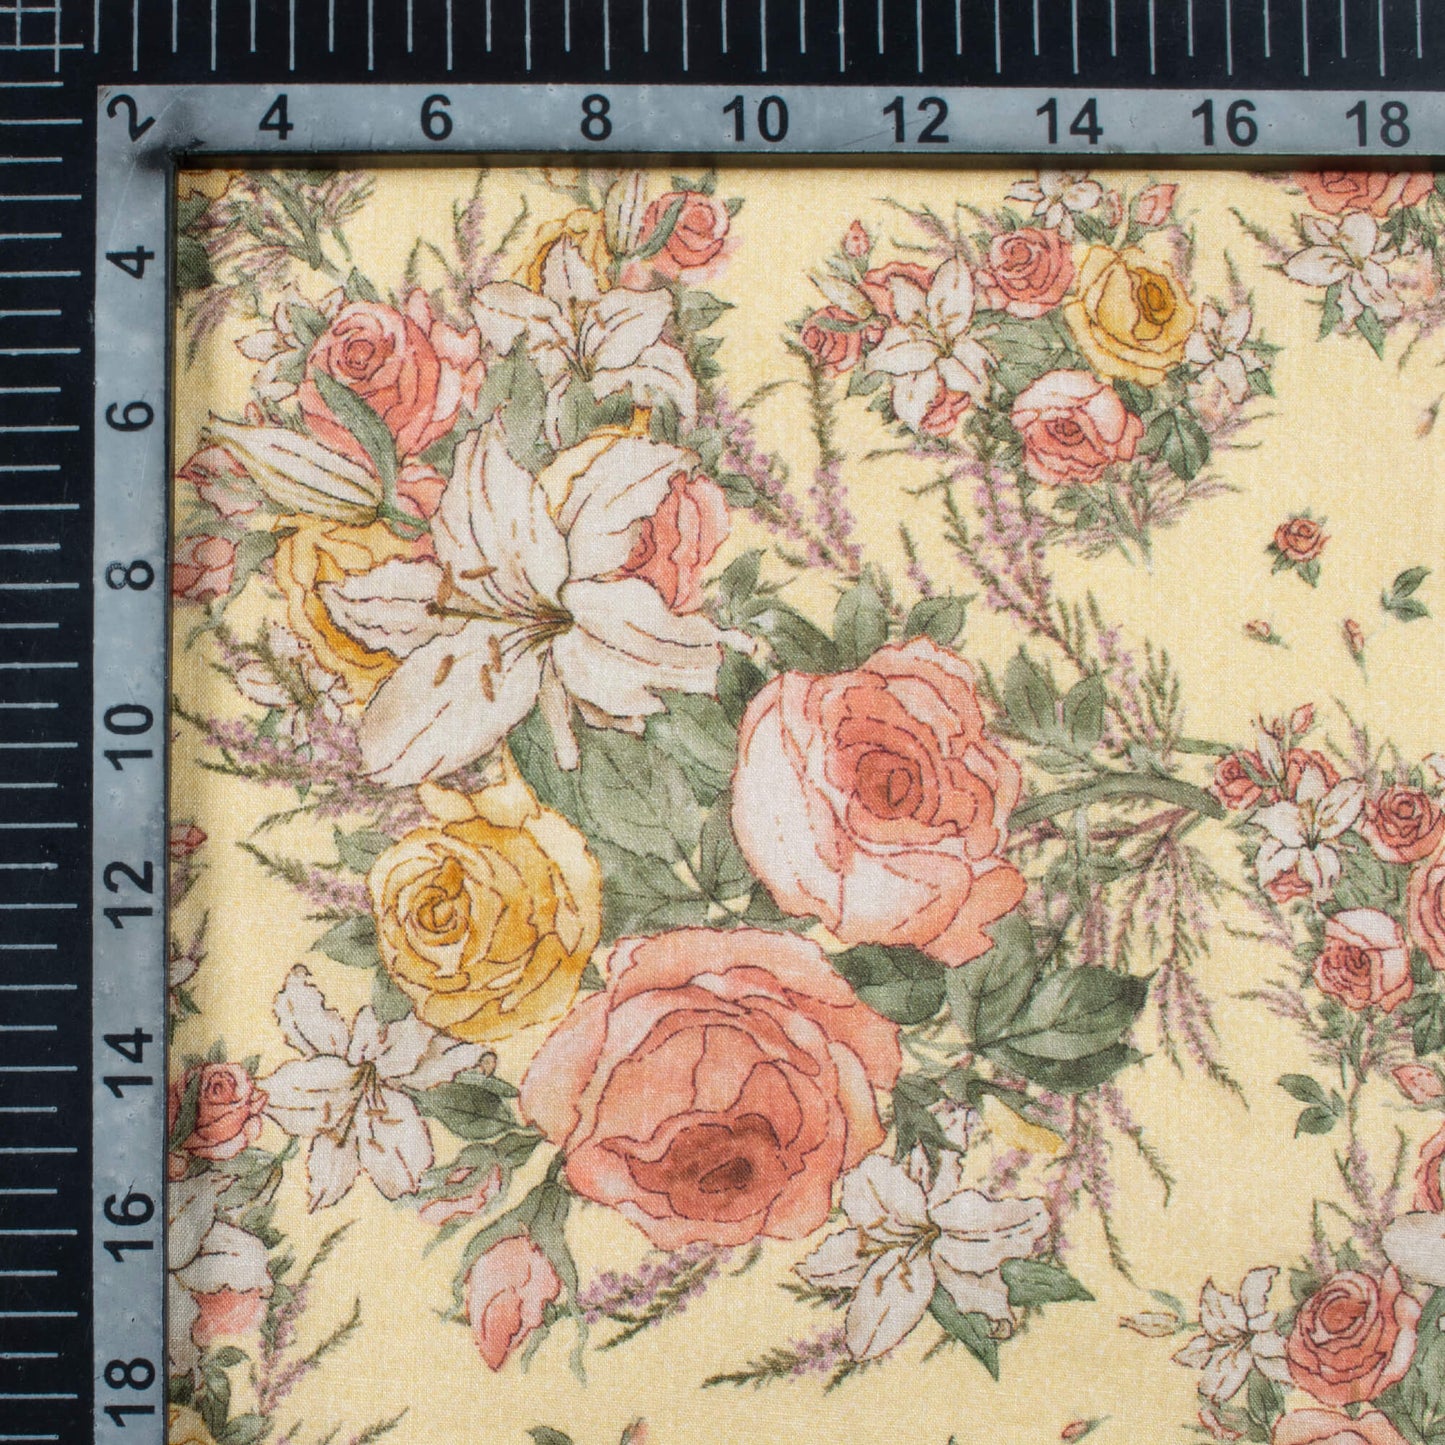 Pale Yellow And Peach Floral  Pattern Digital Print Cotton Cambric Fabric